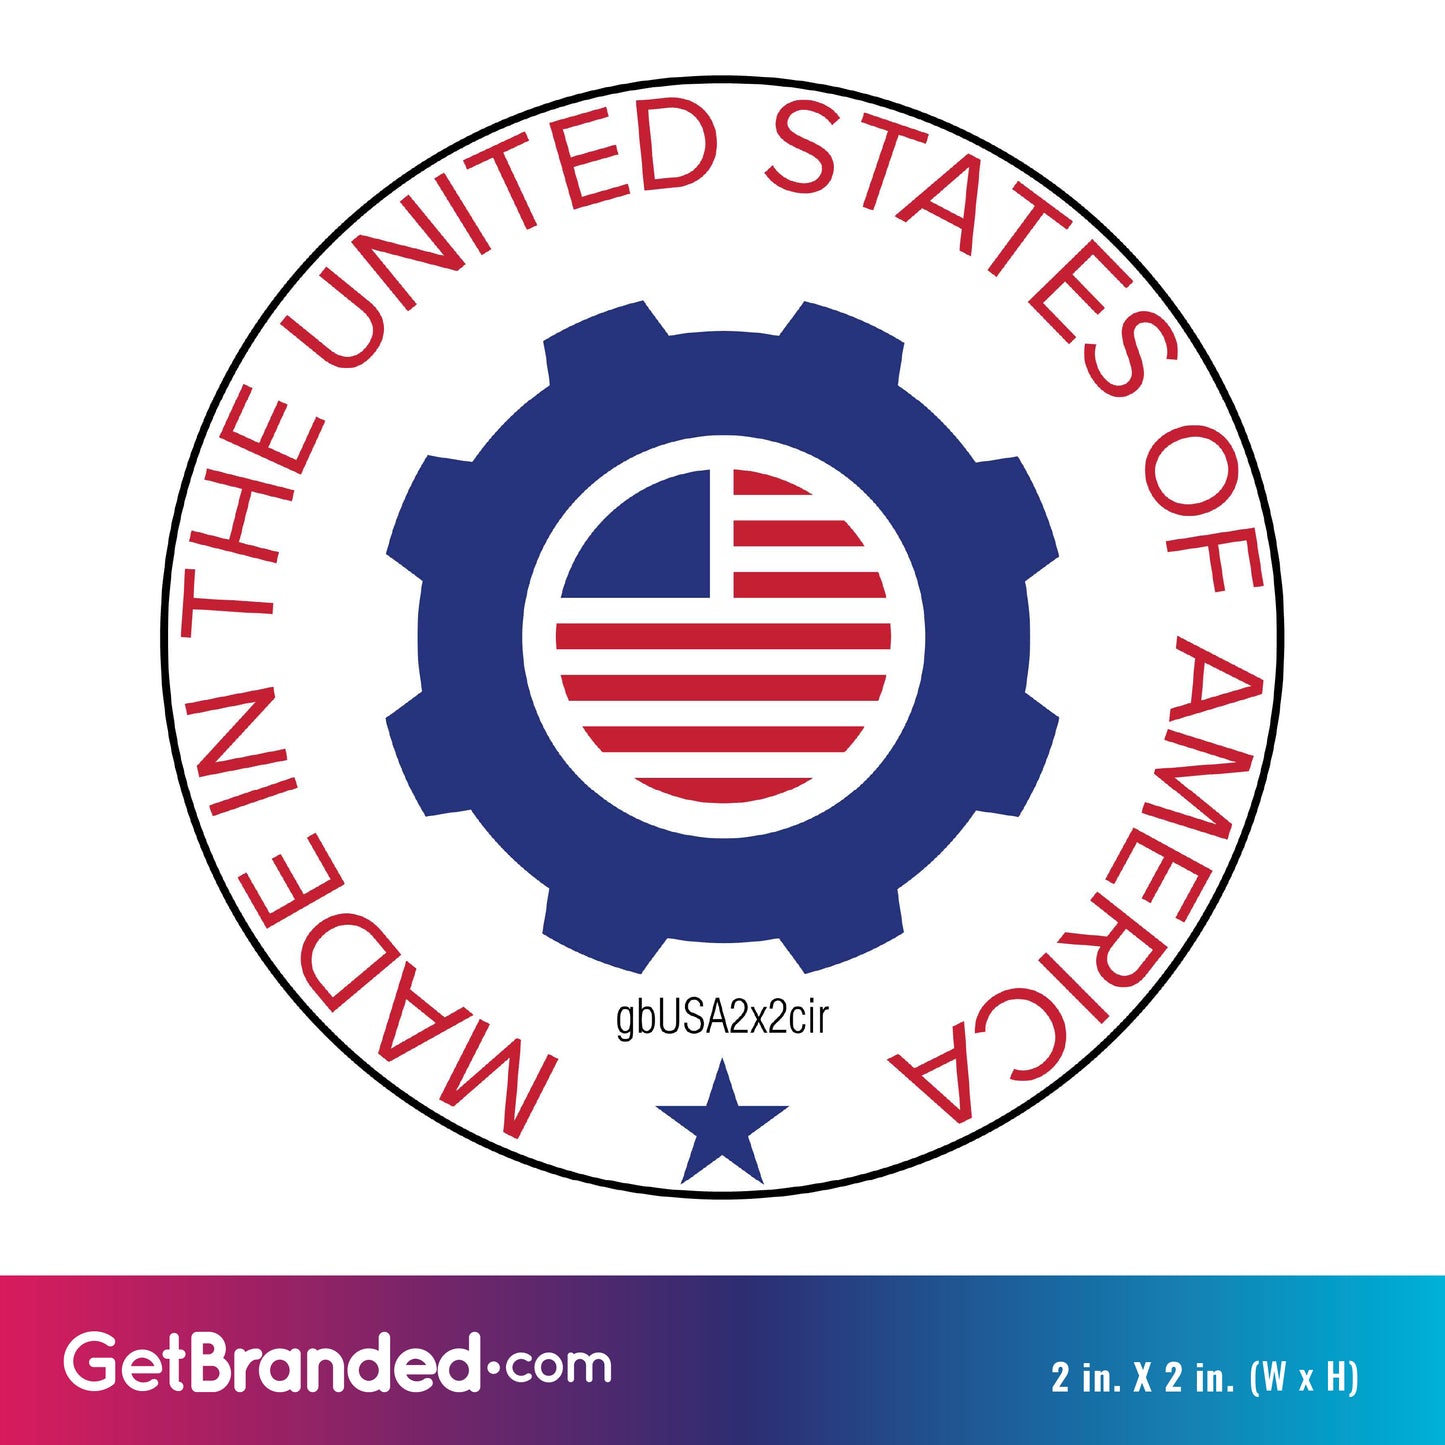 Made in the USA Circle Decal size guide.